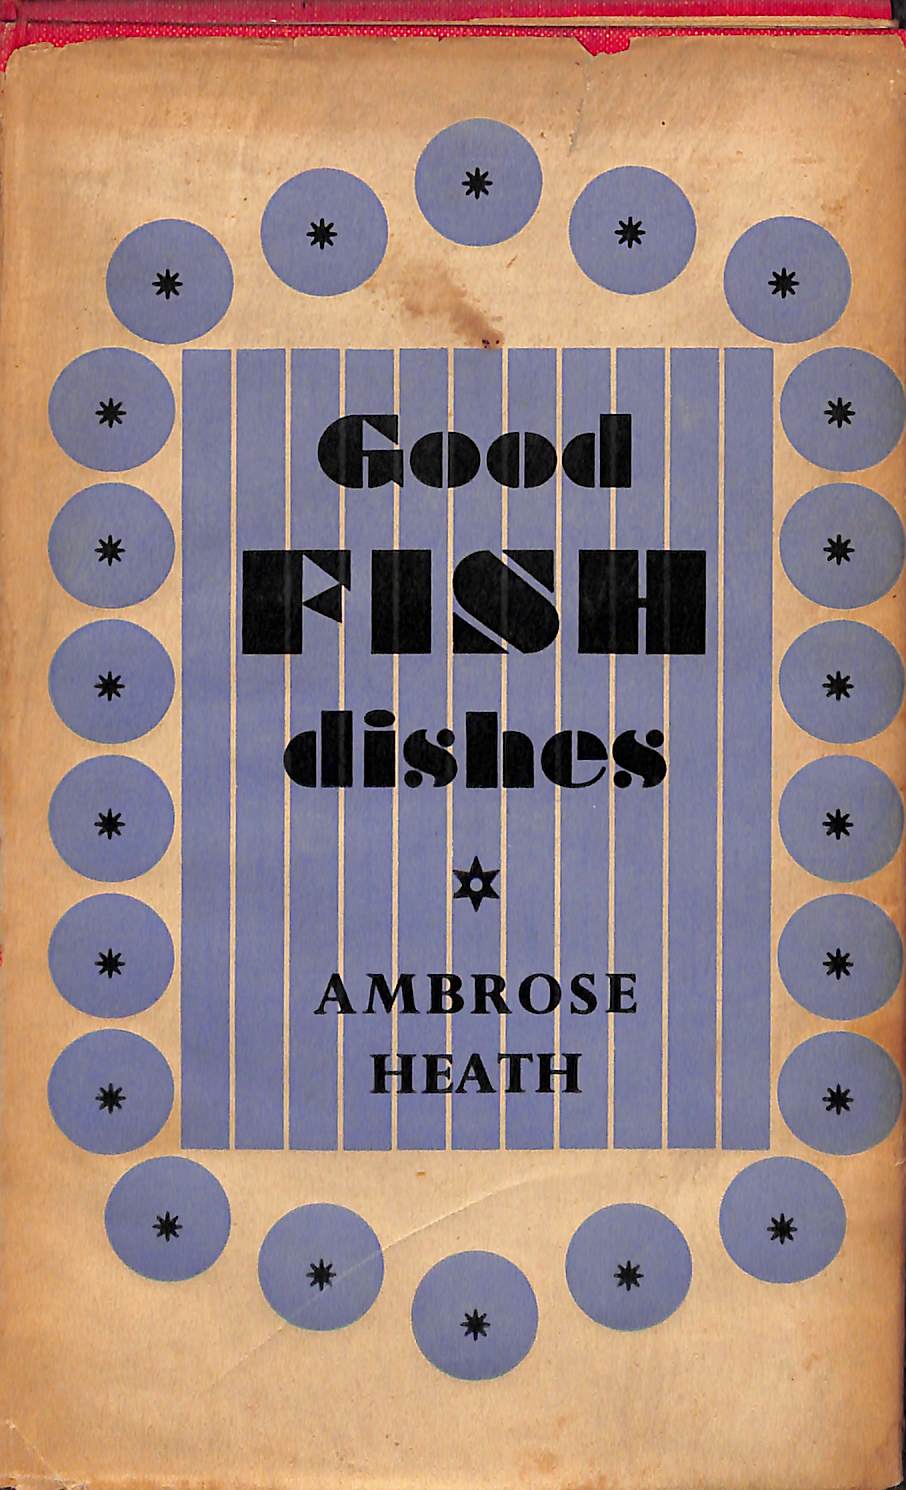 "Good Fish Dishes' 1946 3rd Imp by Ambrose Heath (SOLD)